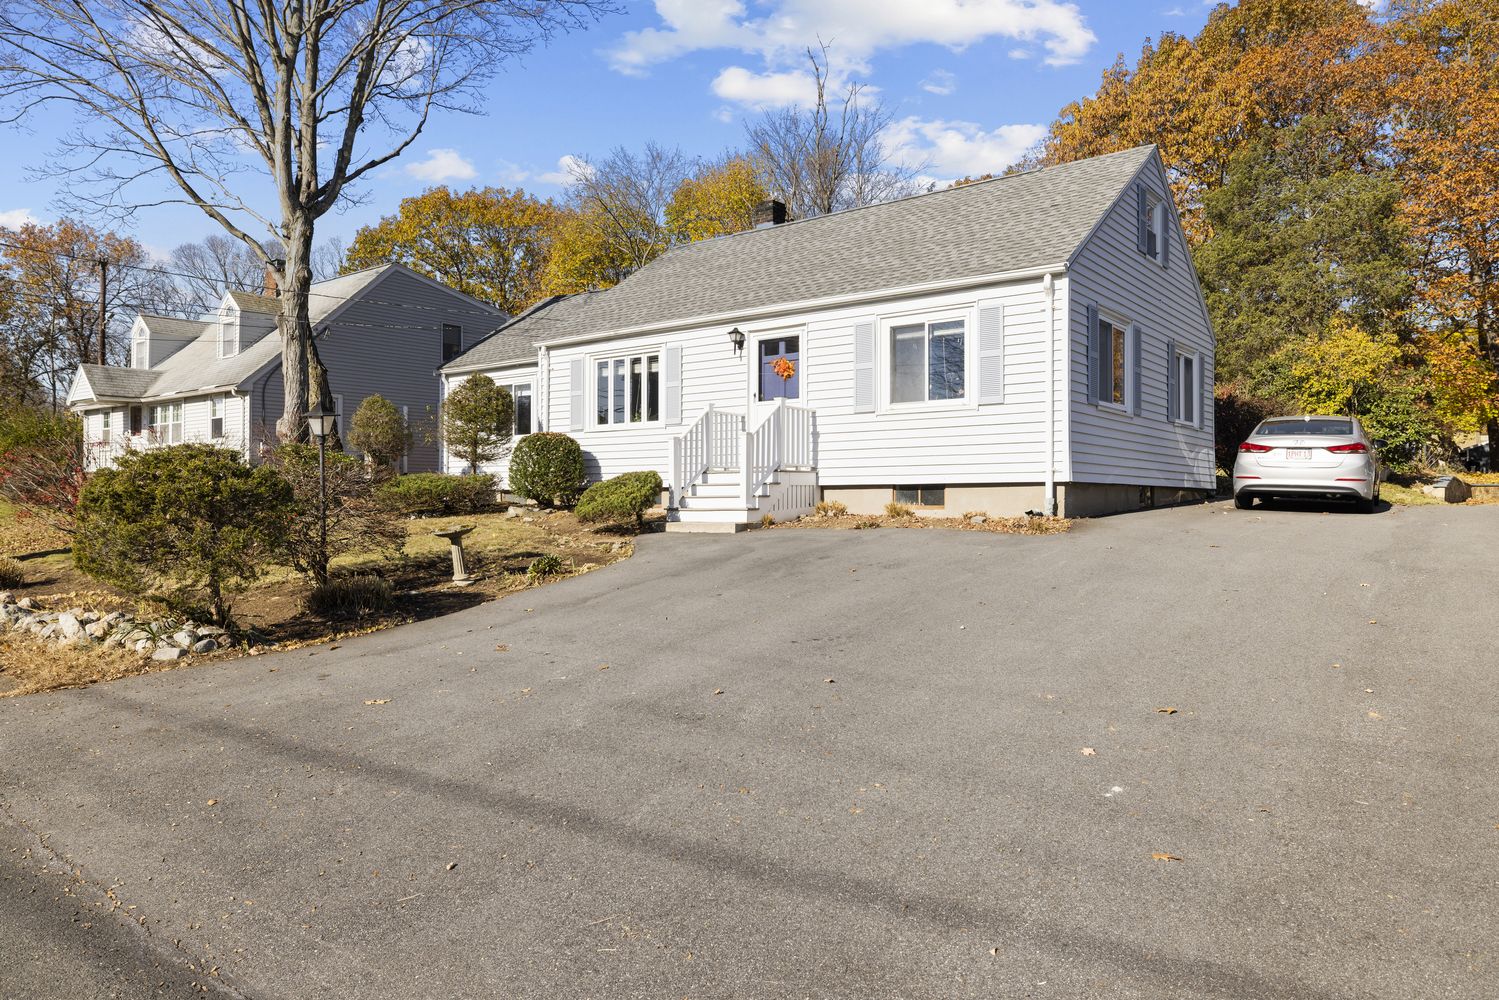 Saugus, MA Commercial Real Estate for Lease and Sale